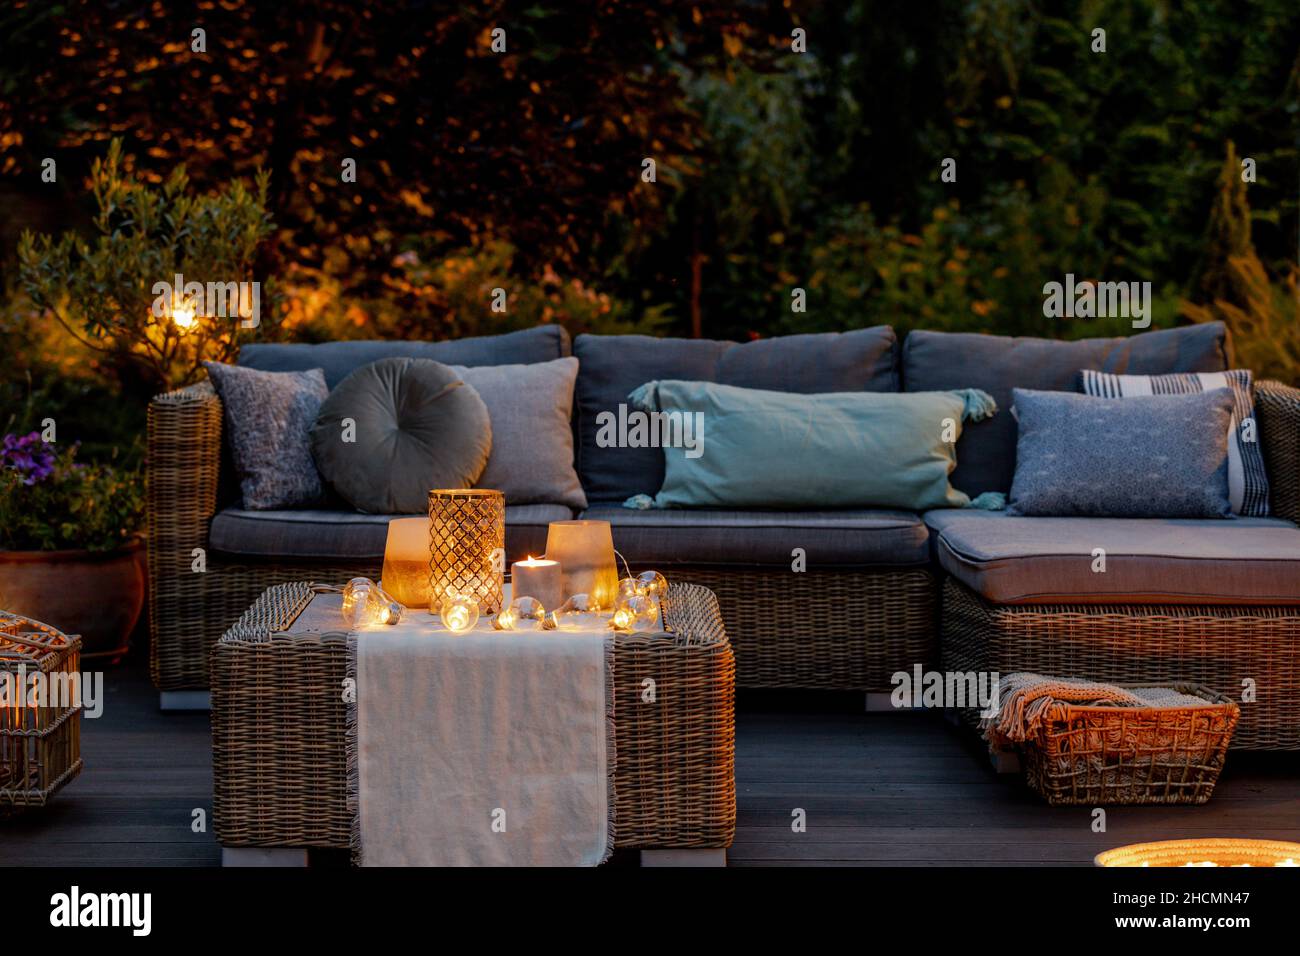 Warm summer night in the garden with trendy furniture, lights, lanterns and candles Stock Photo